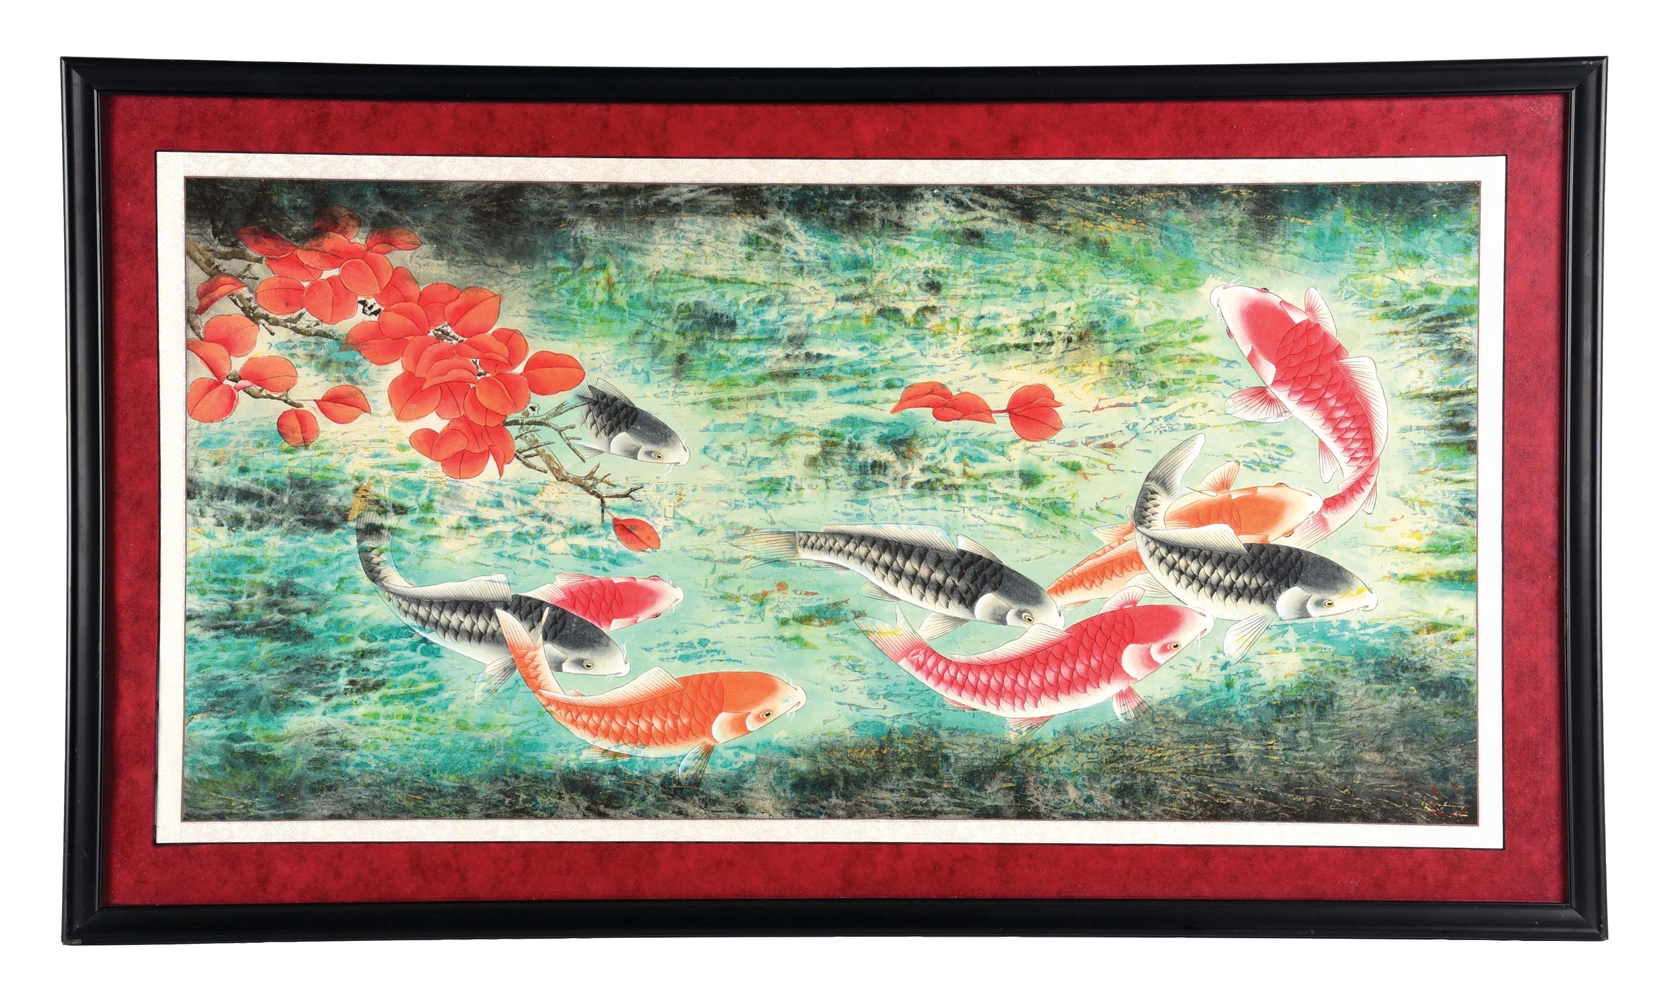 FRAMED PAINTING FISH IN KOI POND.